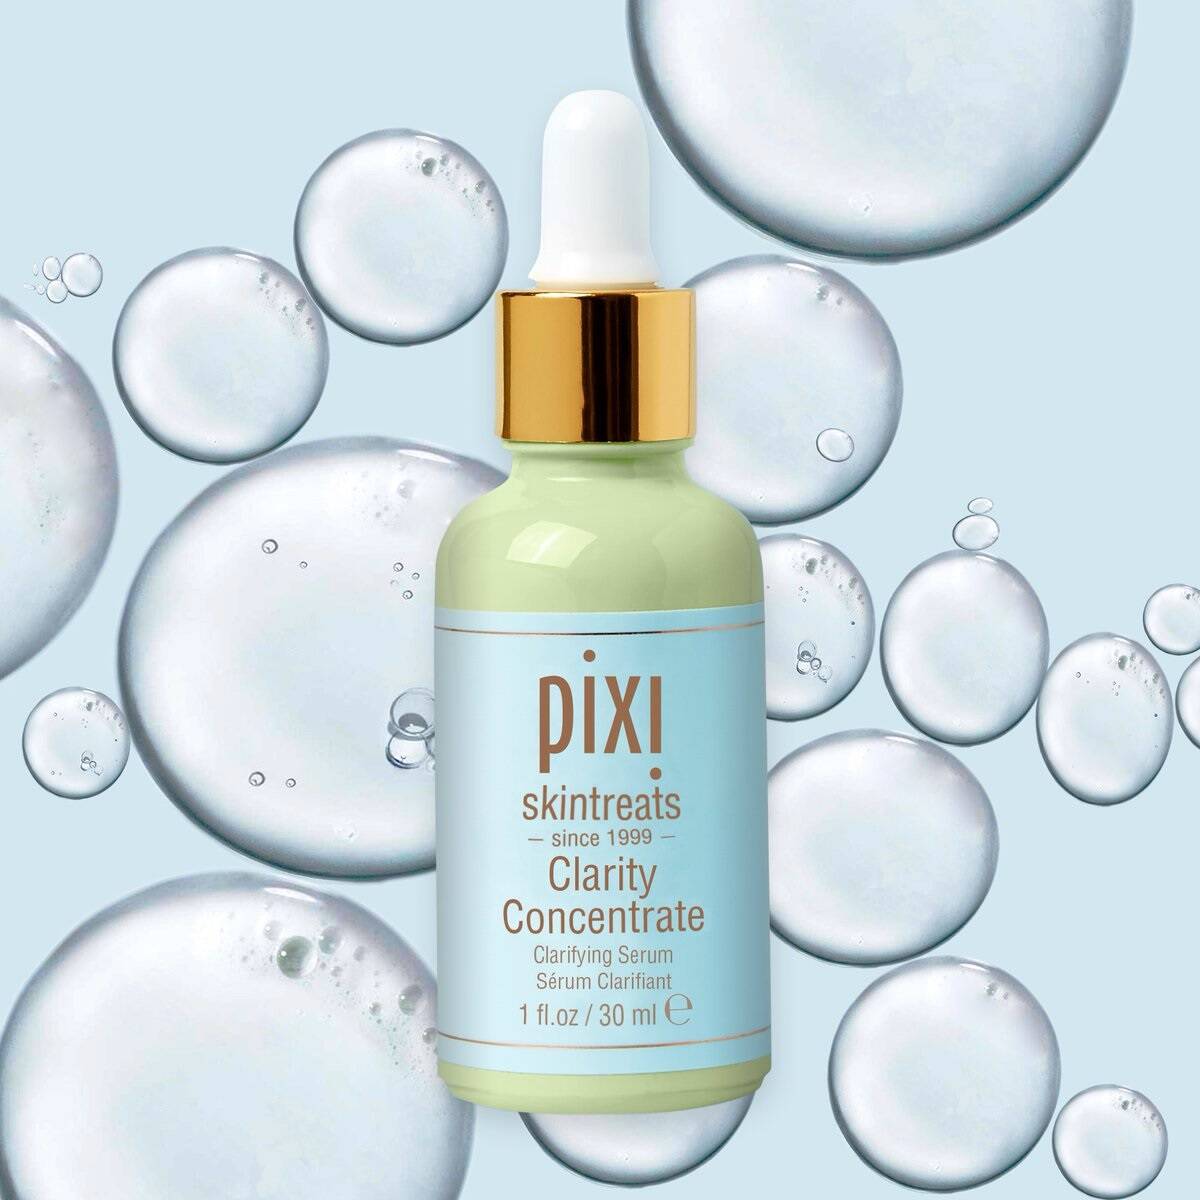 Pixi Skintreats Clarity Concentrate (9)